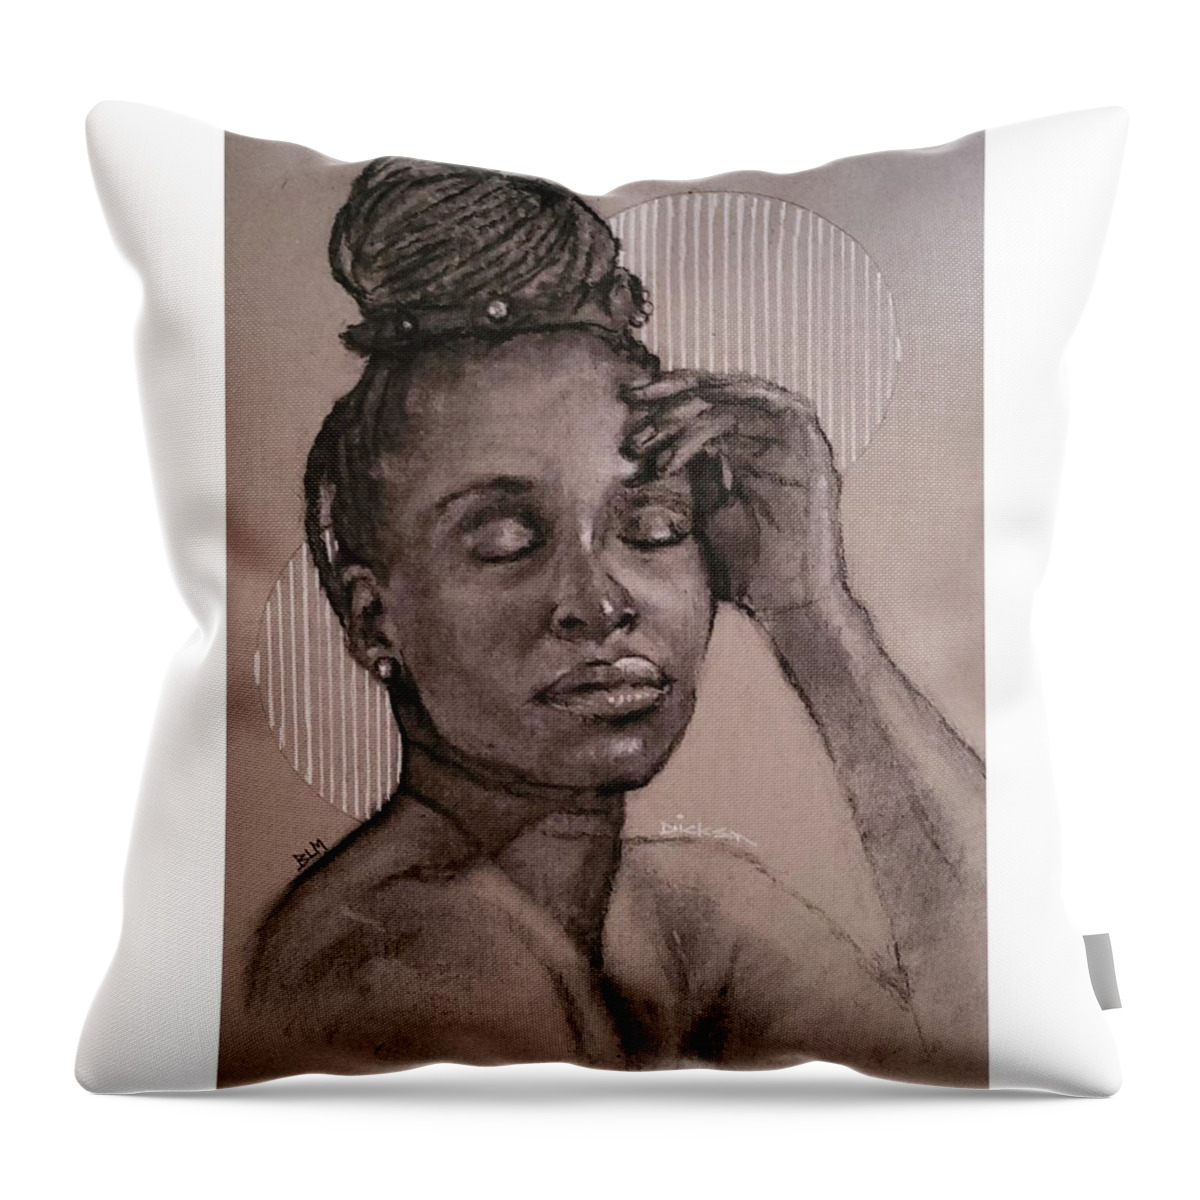  Throw Pillow featuring the painting Alice by Jeff Dickson